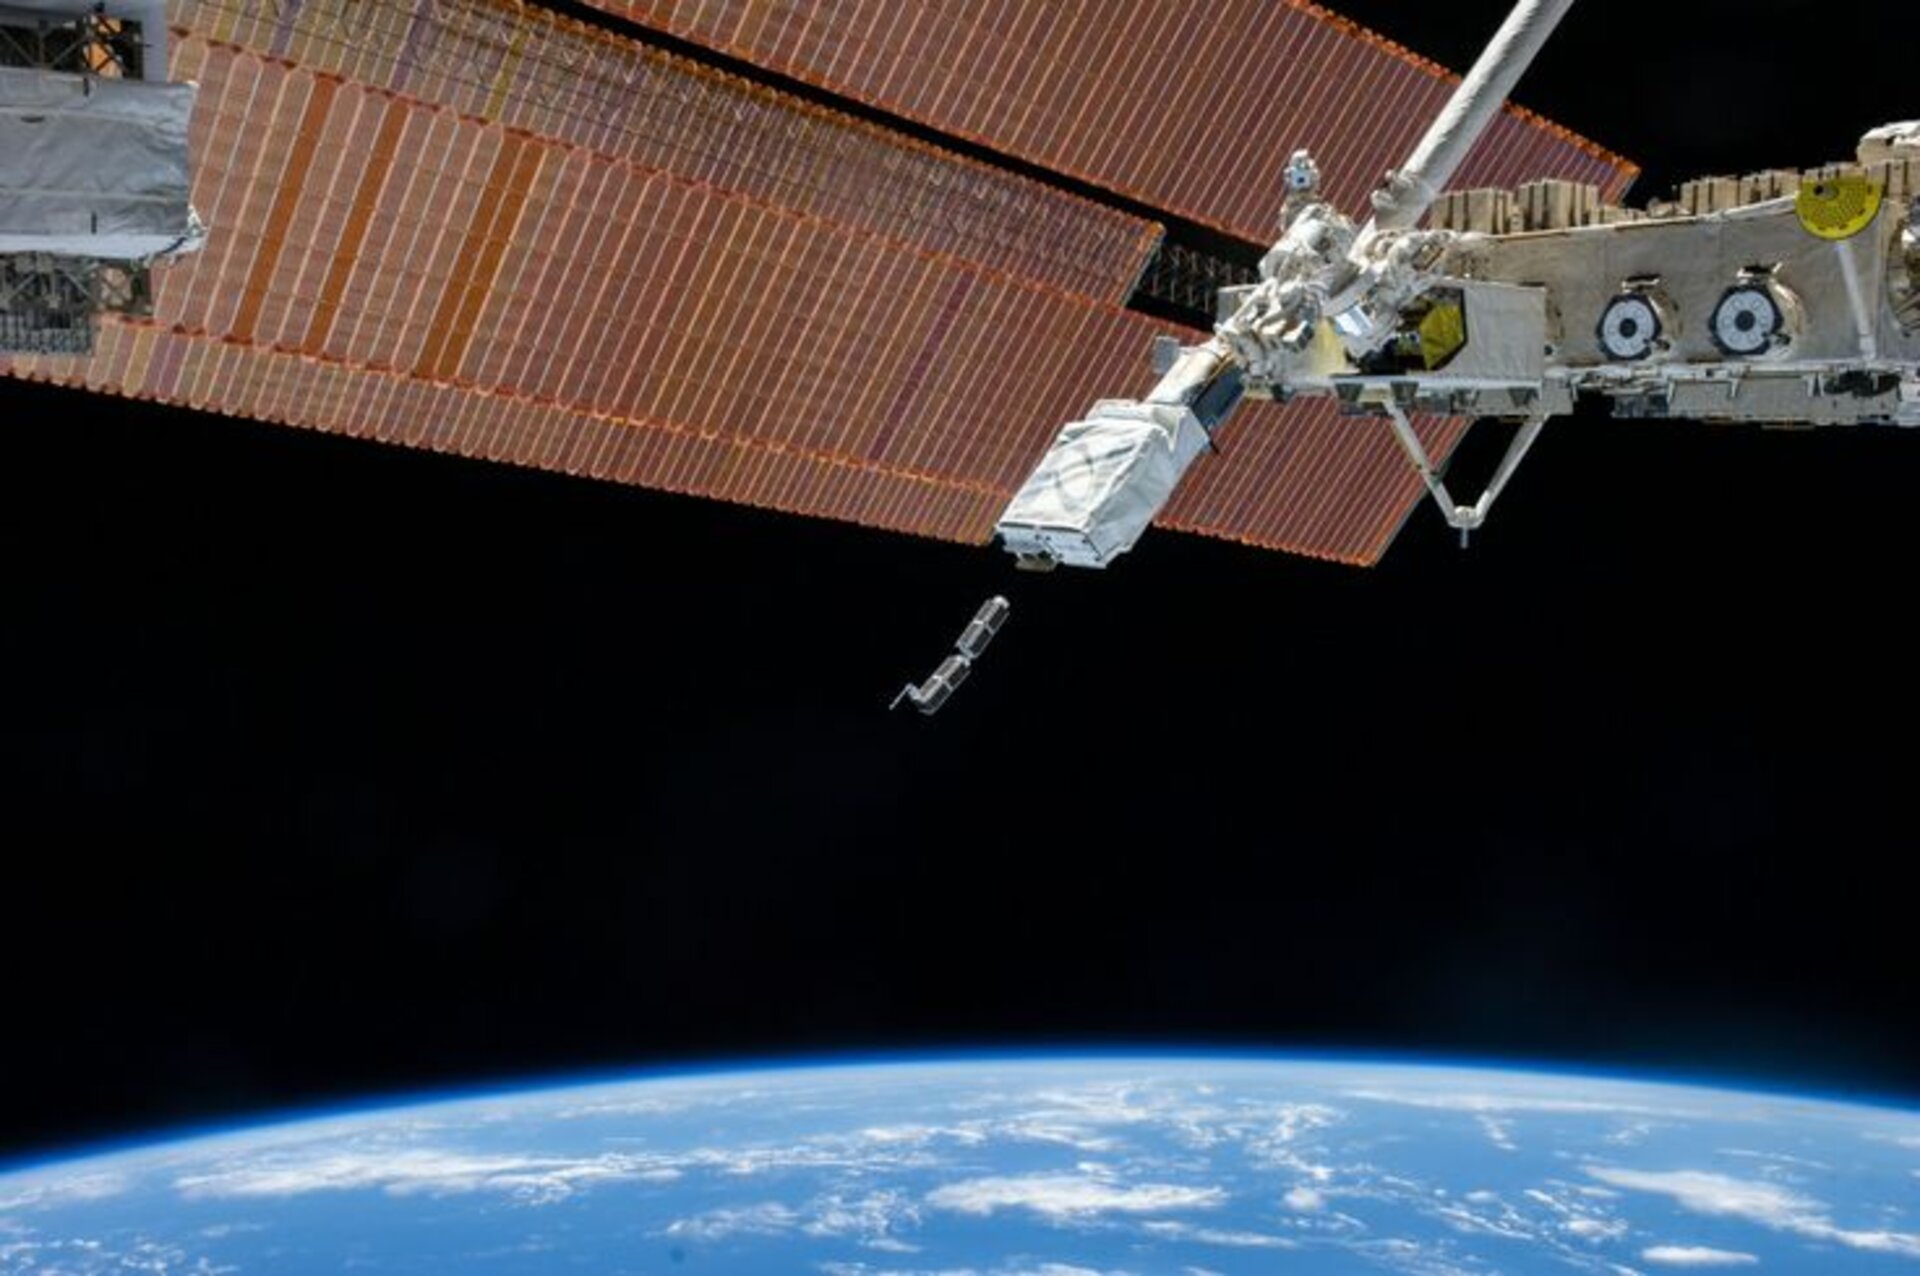 CubeSat deployment from ISS